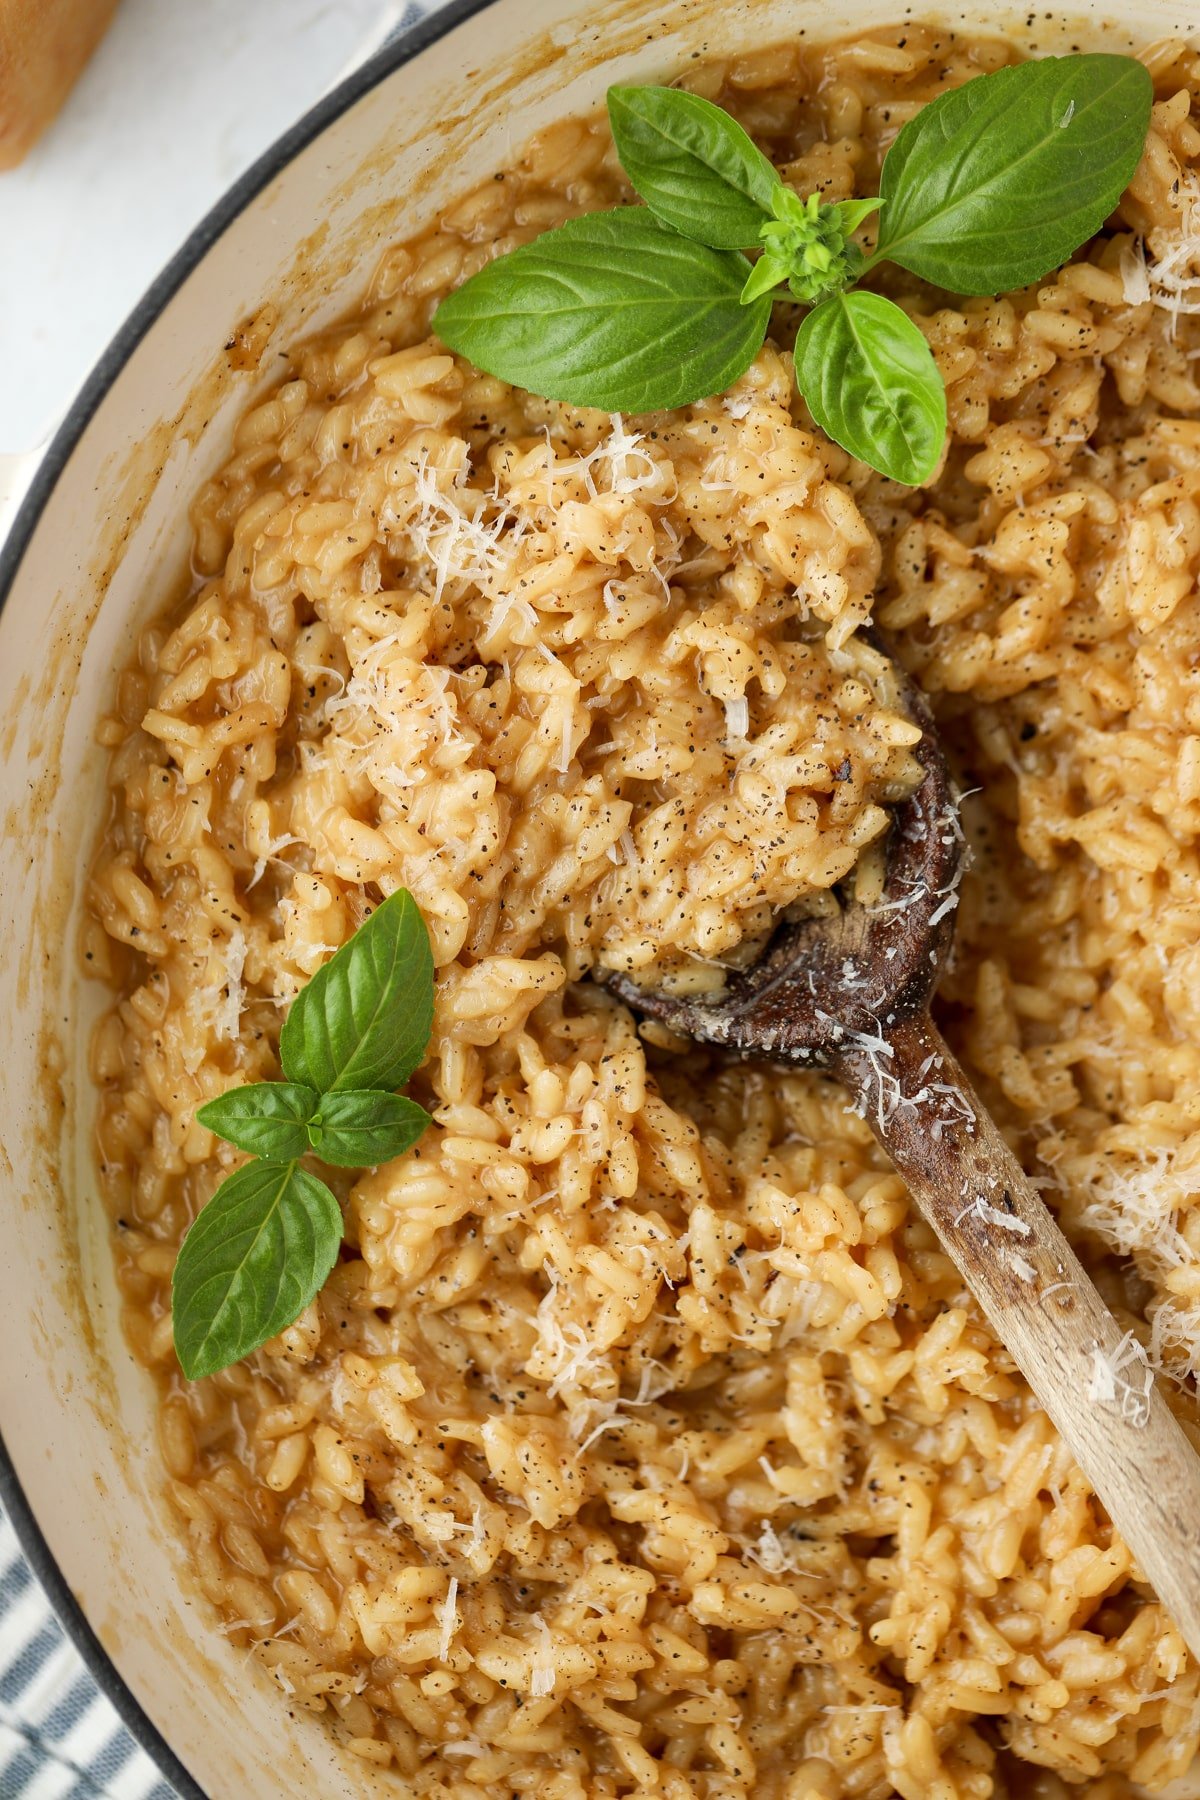 A skillet filled with risotto, with a wooden spoon taking a scoop.